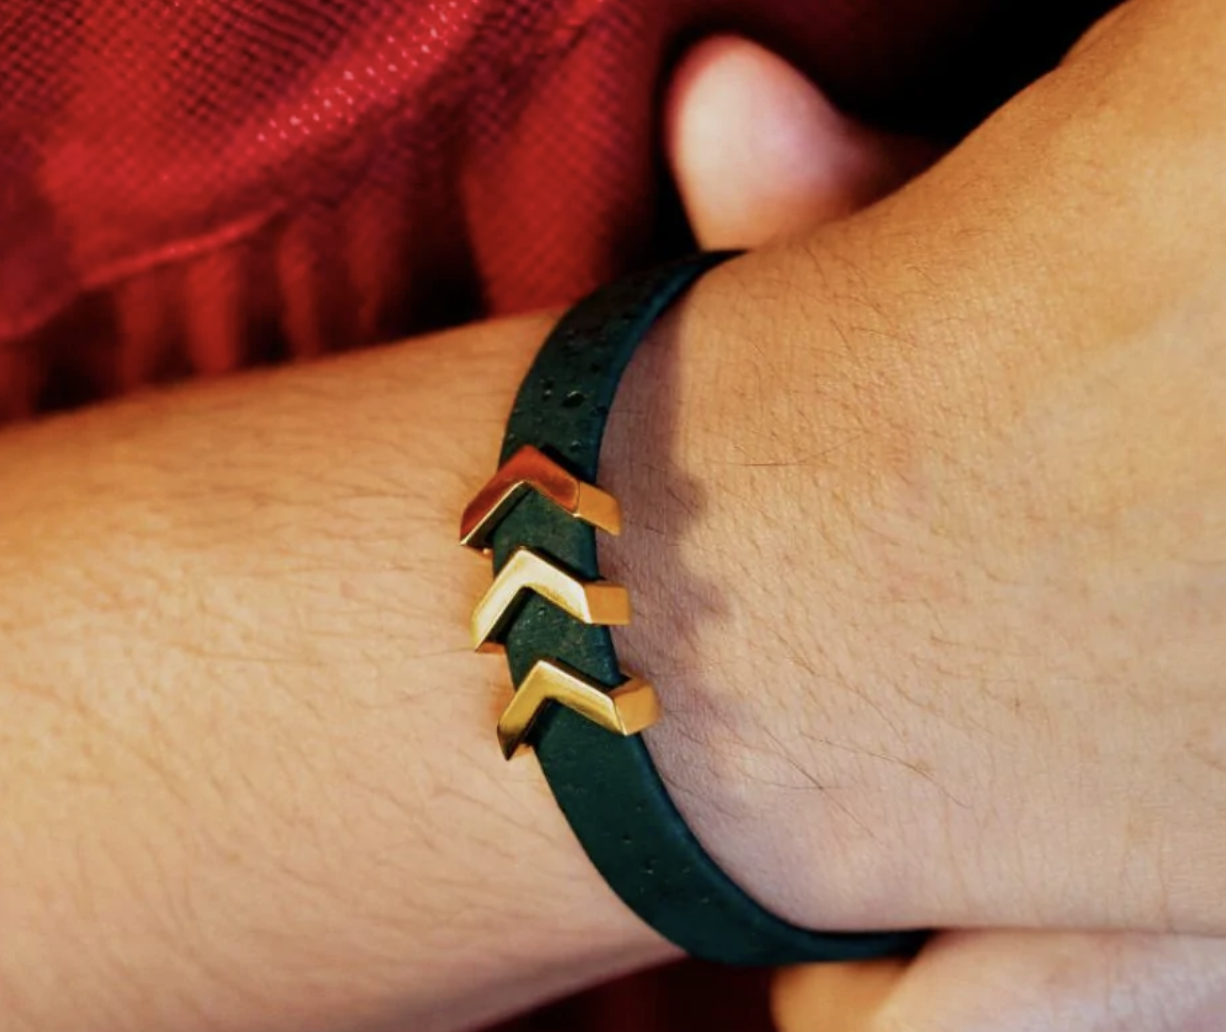 Foret a sustainable fashion brand launches men’s vegan leather jewellery line 